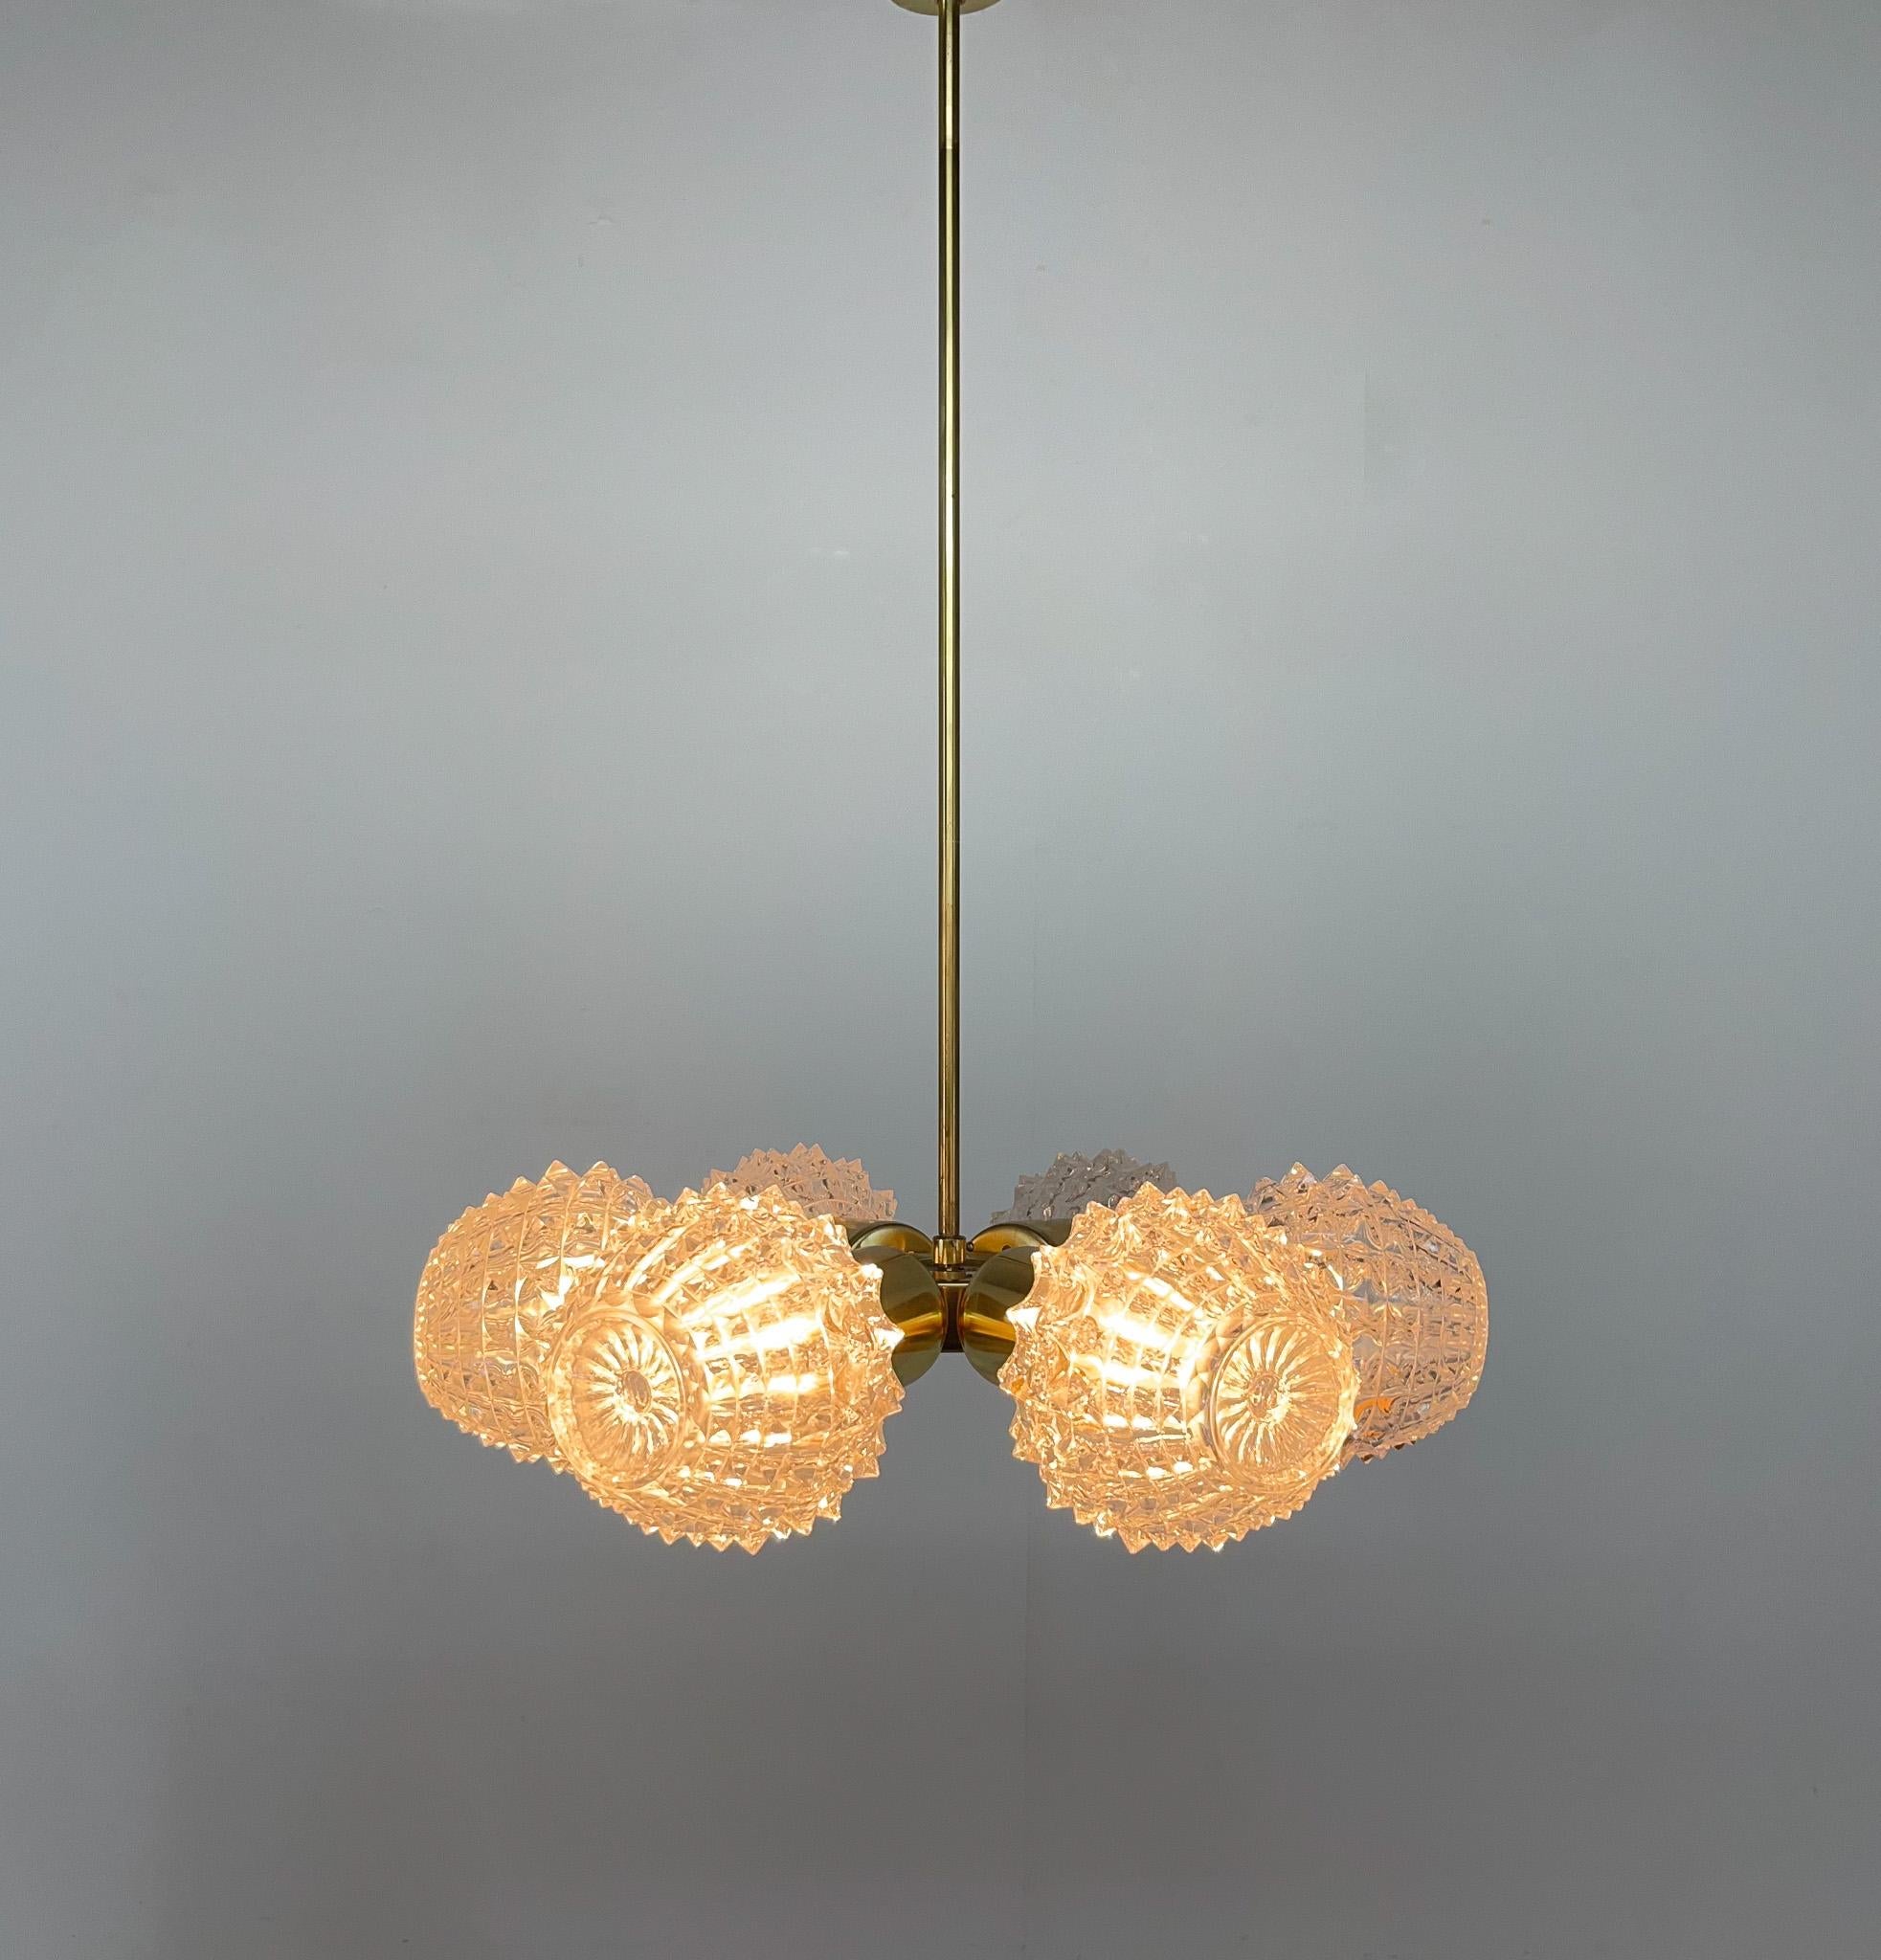 Set of two midcentury chandeliers by Kamenický Šenov Glassworks (famous glassworks in Czechoslovakia). Made of brass and glass. 
Very good vintage condition. 
Sold separetely, price is per one item. 
Bulbs: 6x E 14.